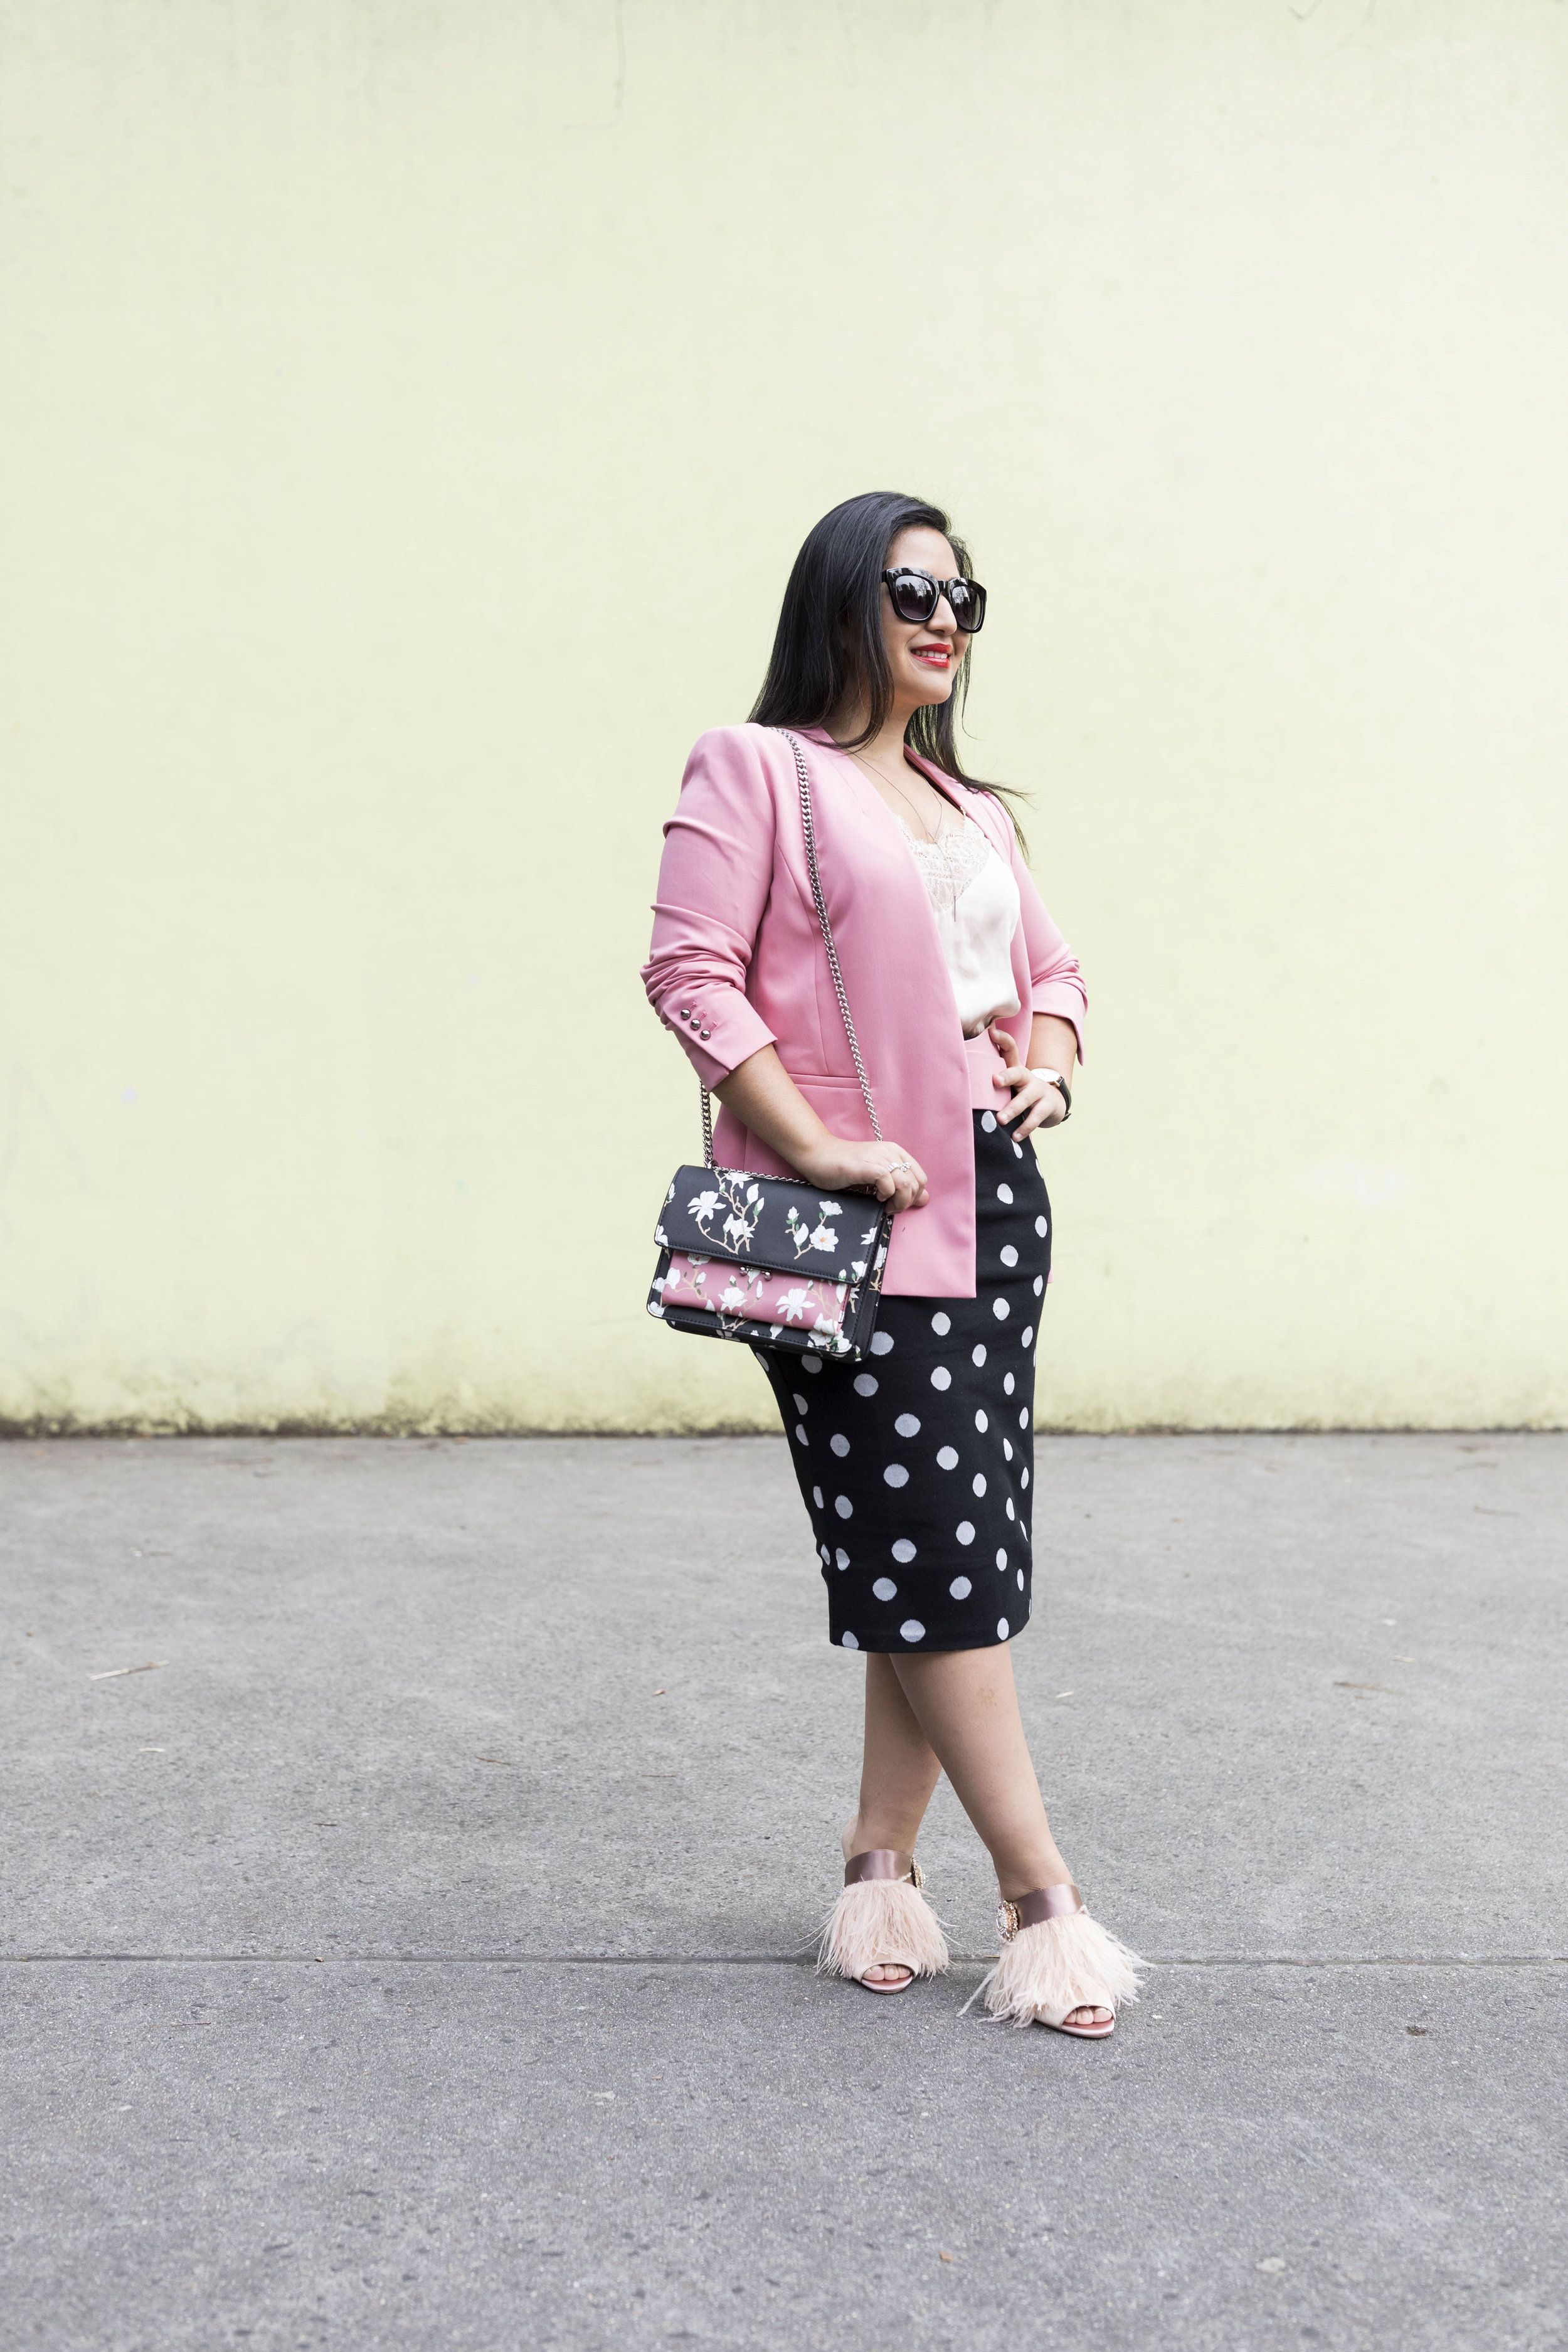 Krity S x Polka Dot and Pink Work Outfit2.jpg